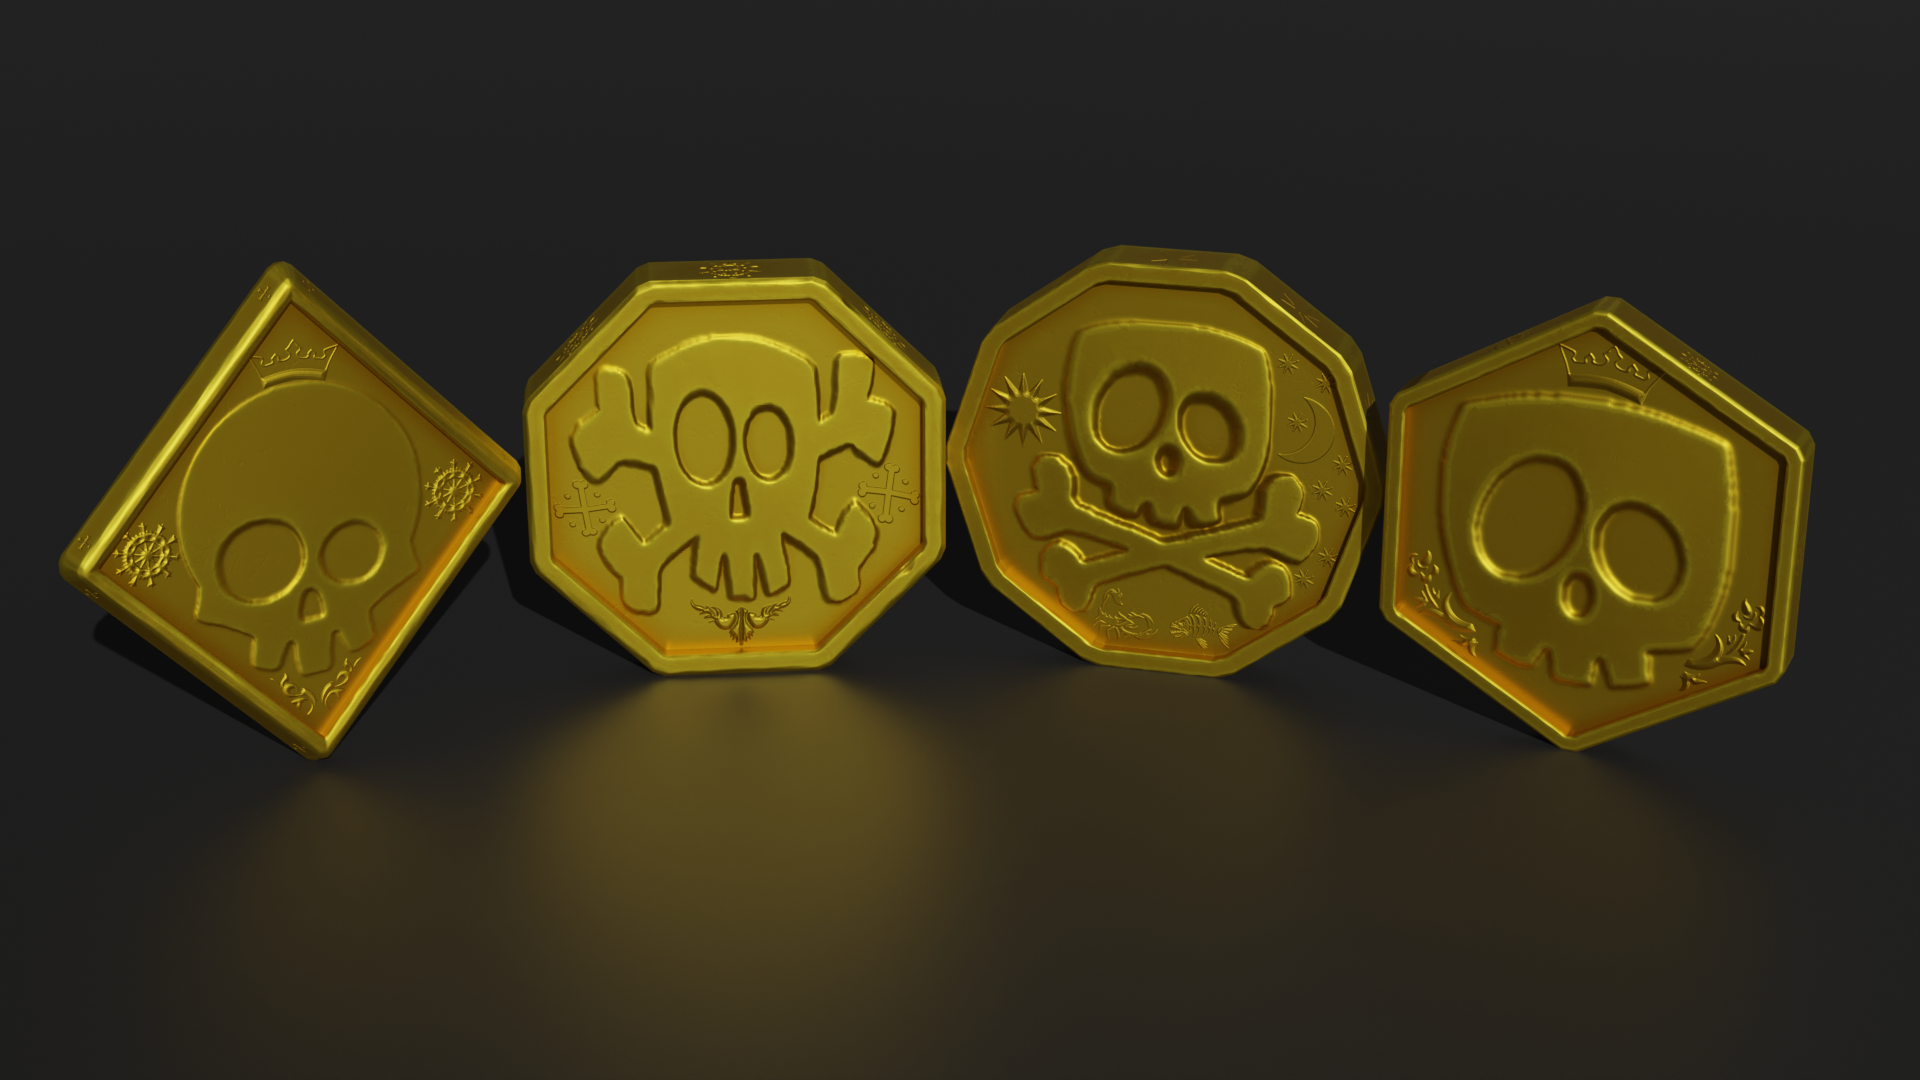 Stylized Golden Coins